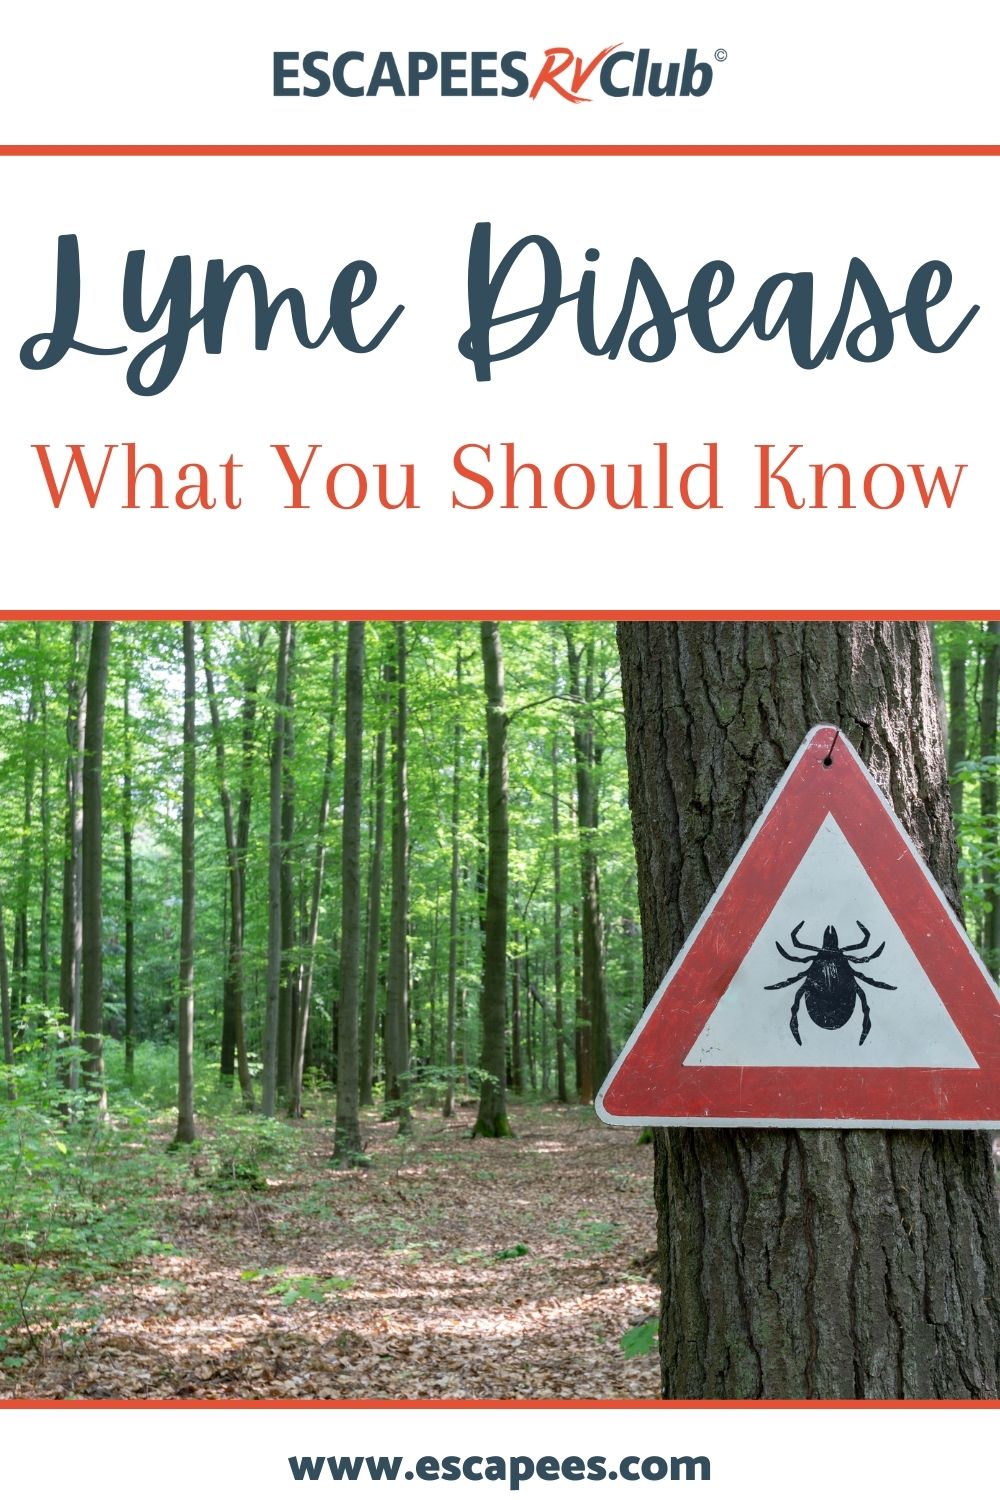 Once Bitten, Twice Shy: What You Should Know About Lyme Disease 2